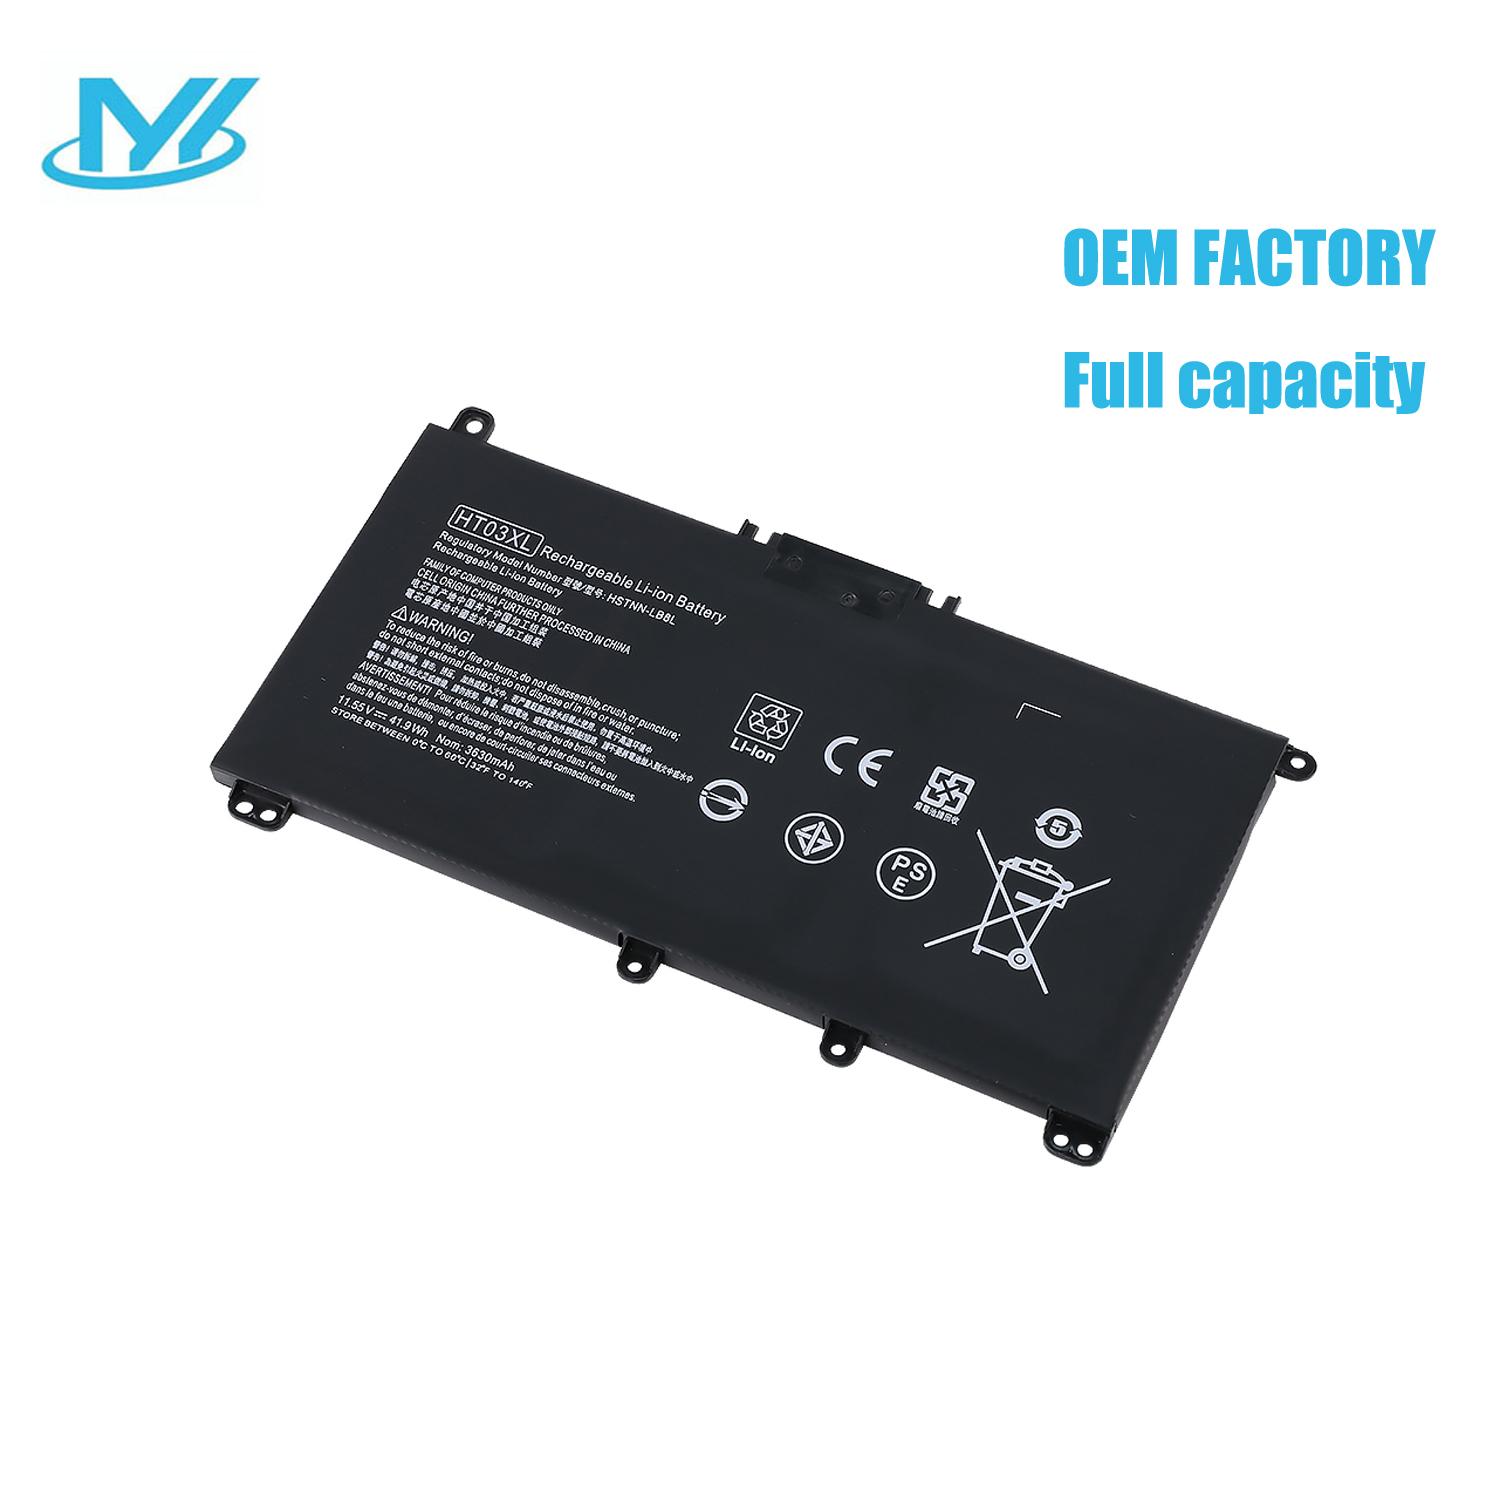 HT03XL rechargeable lithium ion Notebook battery Laptop battery for HP TPN-Q207/TPN-Q208/TPN-Q209/TPN-C135/TPN-C136/TPN-I130/TPN-I131/TPN-I132/TPN-I133/TPN-I134/240 G7 /245 G7/ 250 G7/ 255 G7/ 340